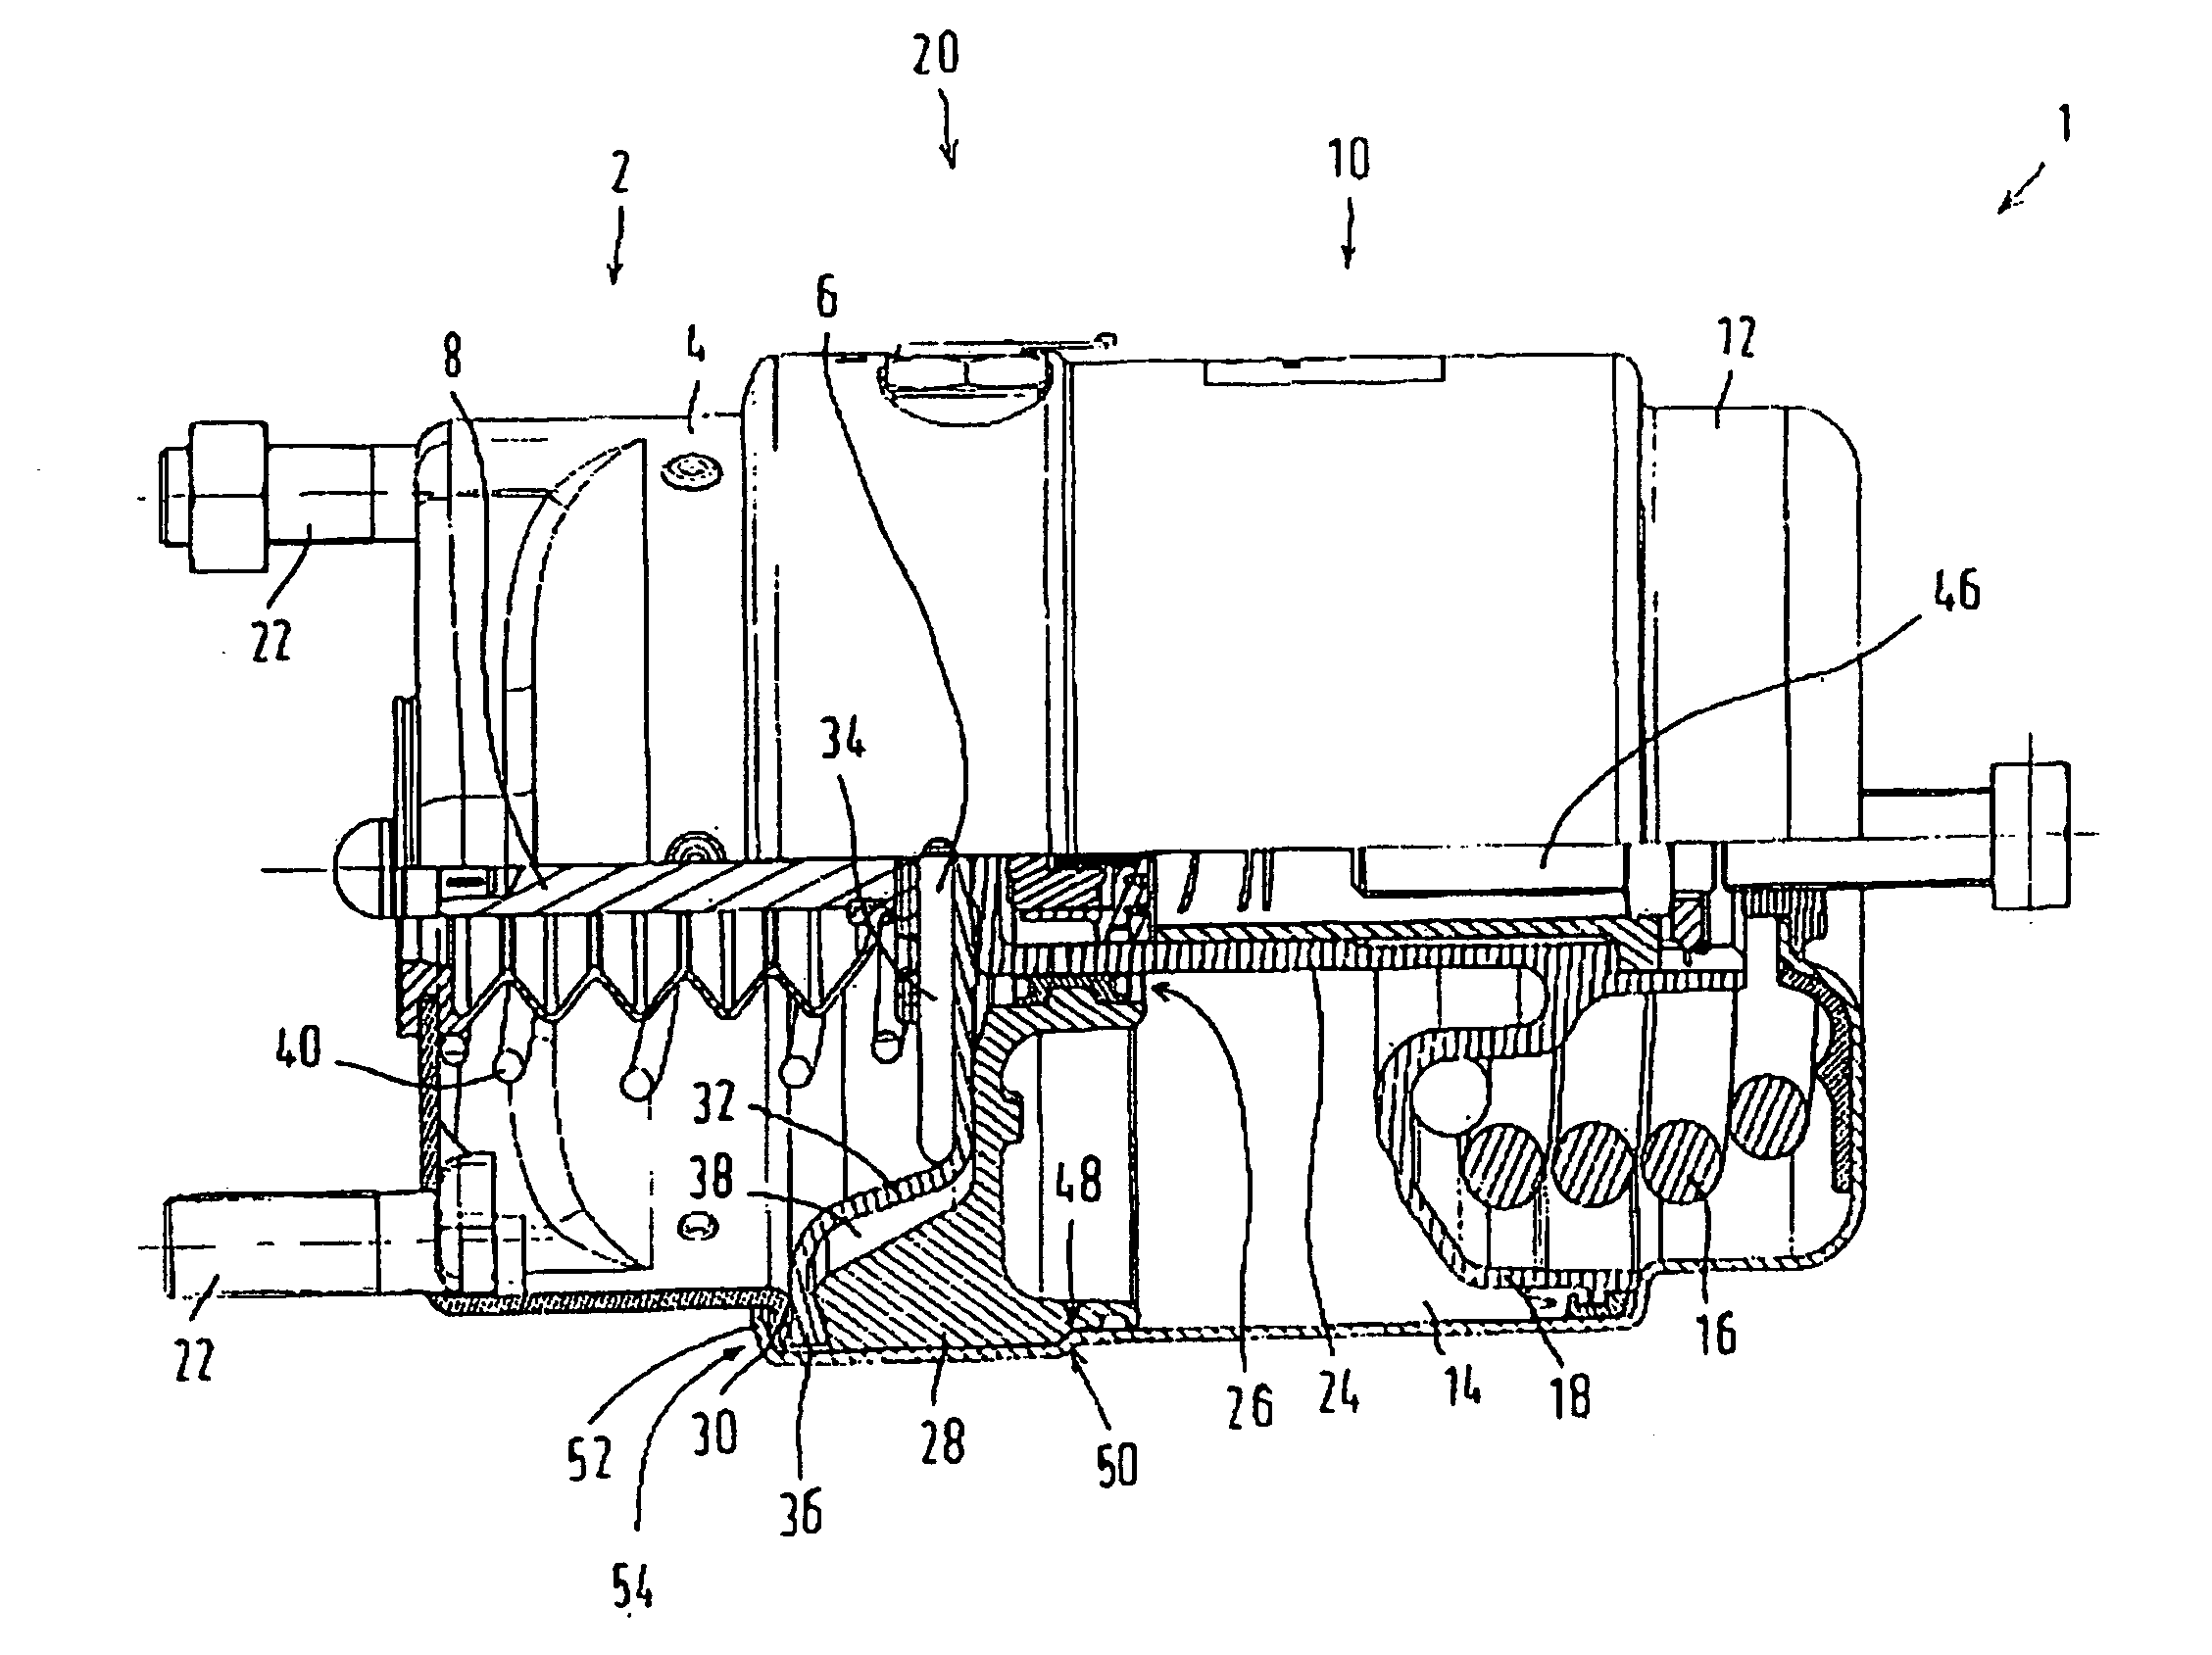 Method for manufacturing steel housings, composed of at least two housing components, for assemblies installed in vehicles